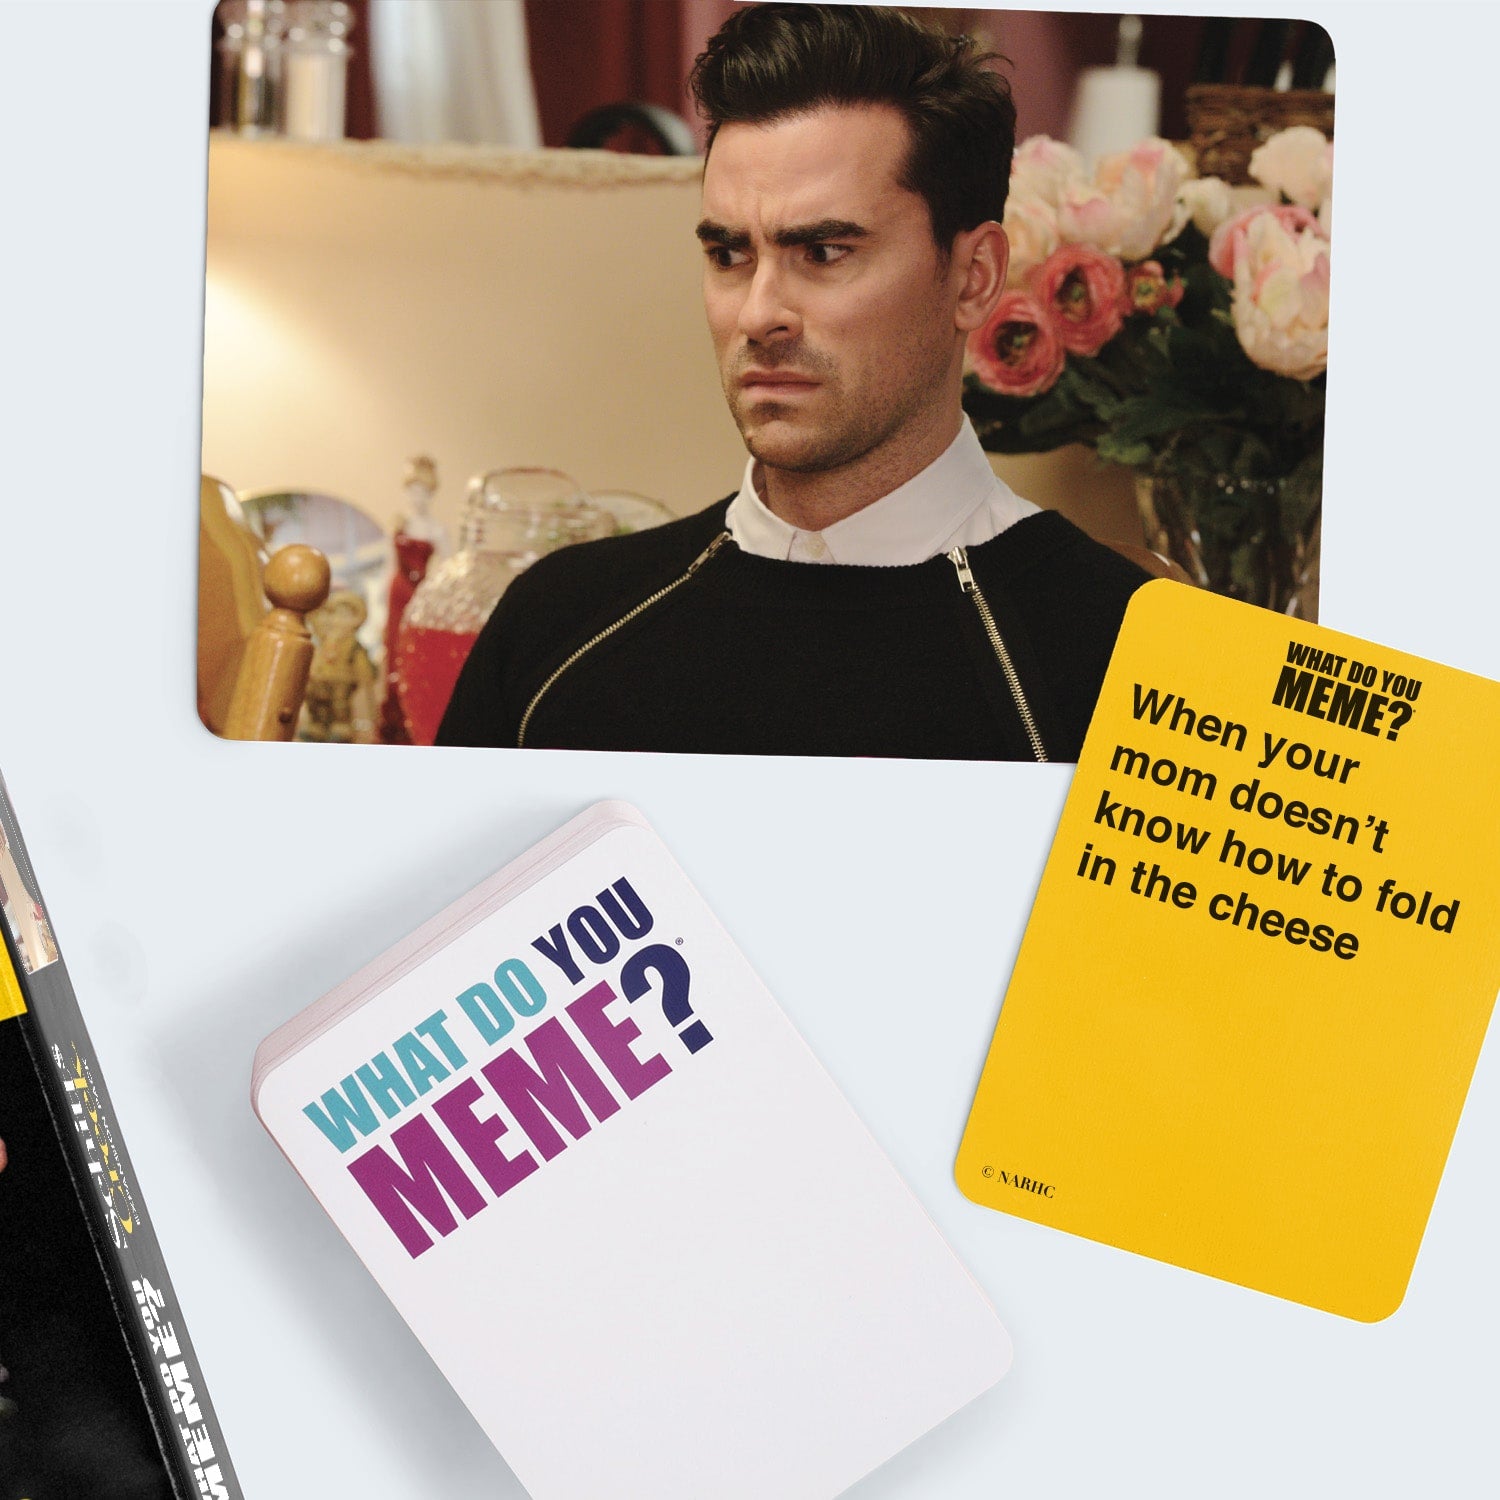 what-do-you-meme-schitt-s-creek-expansion-pack-game-box-and-game-play-04-what-do-you-meme-by-relatable